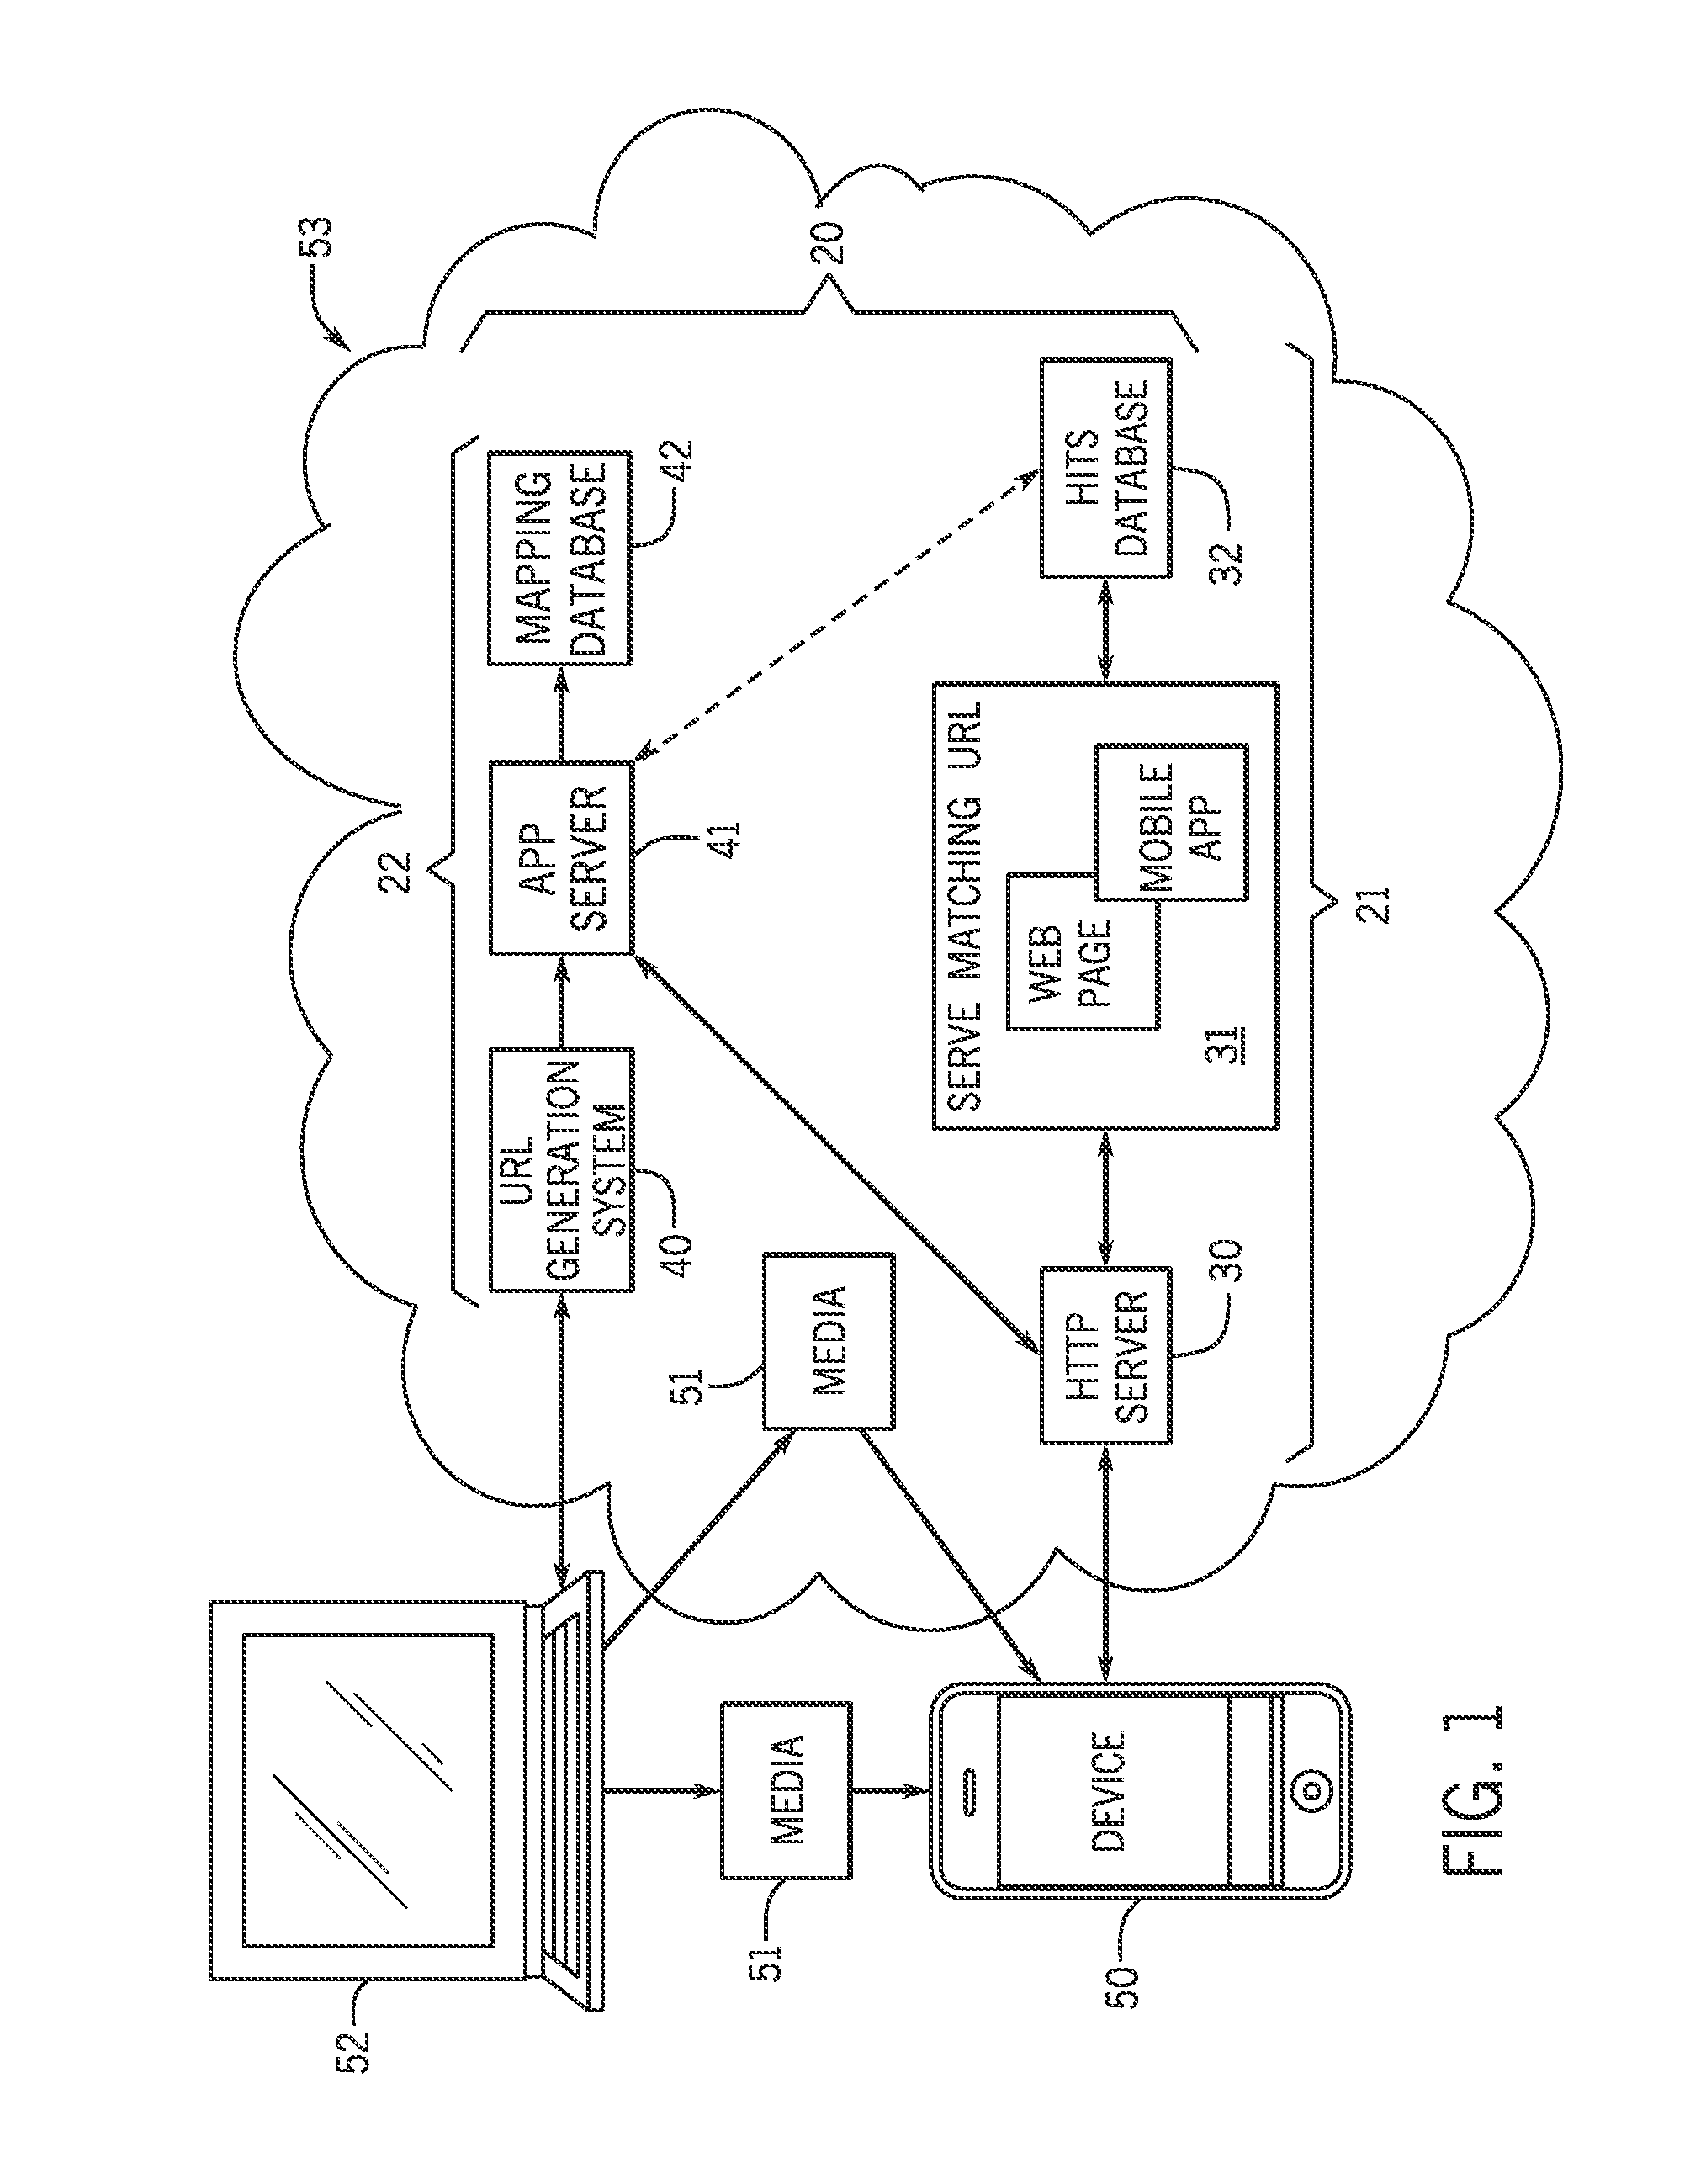 Uniform resource locator mapping and routing system and method